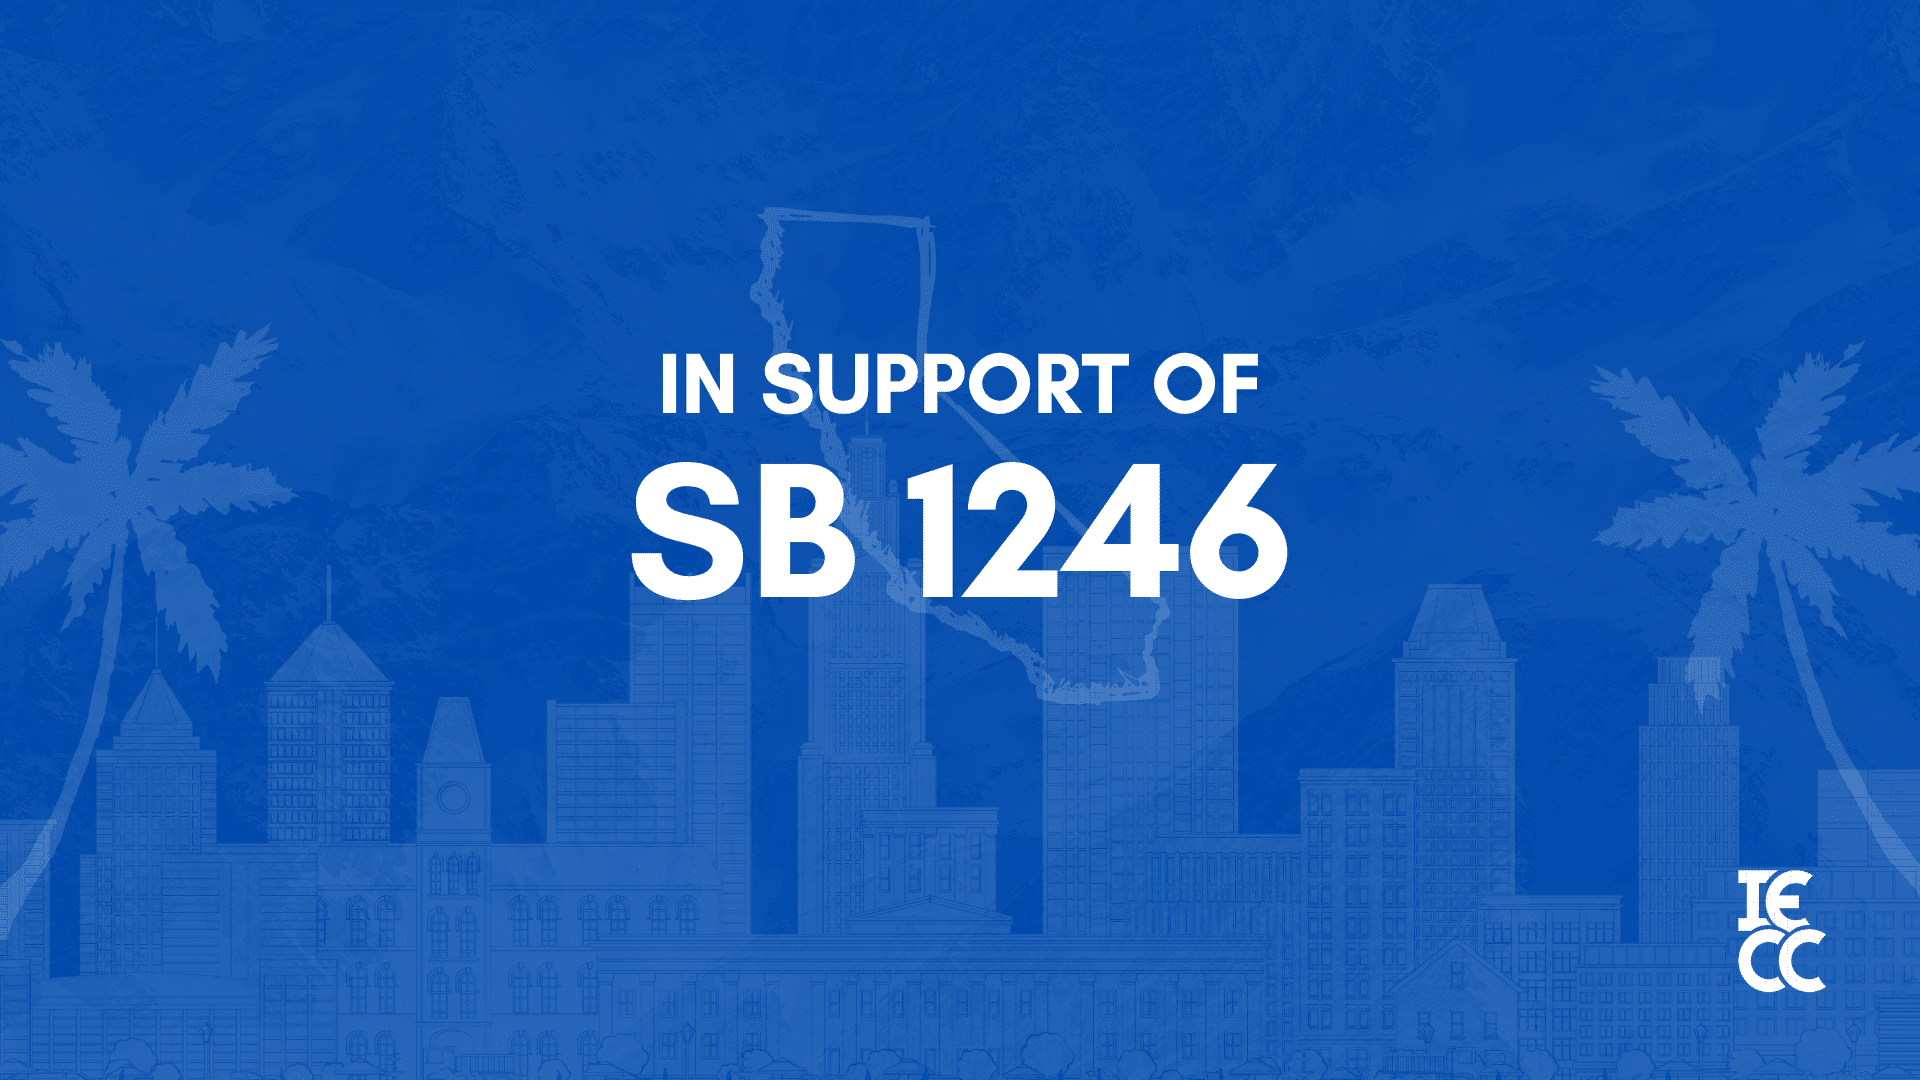 In Support of SB 1246